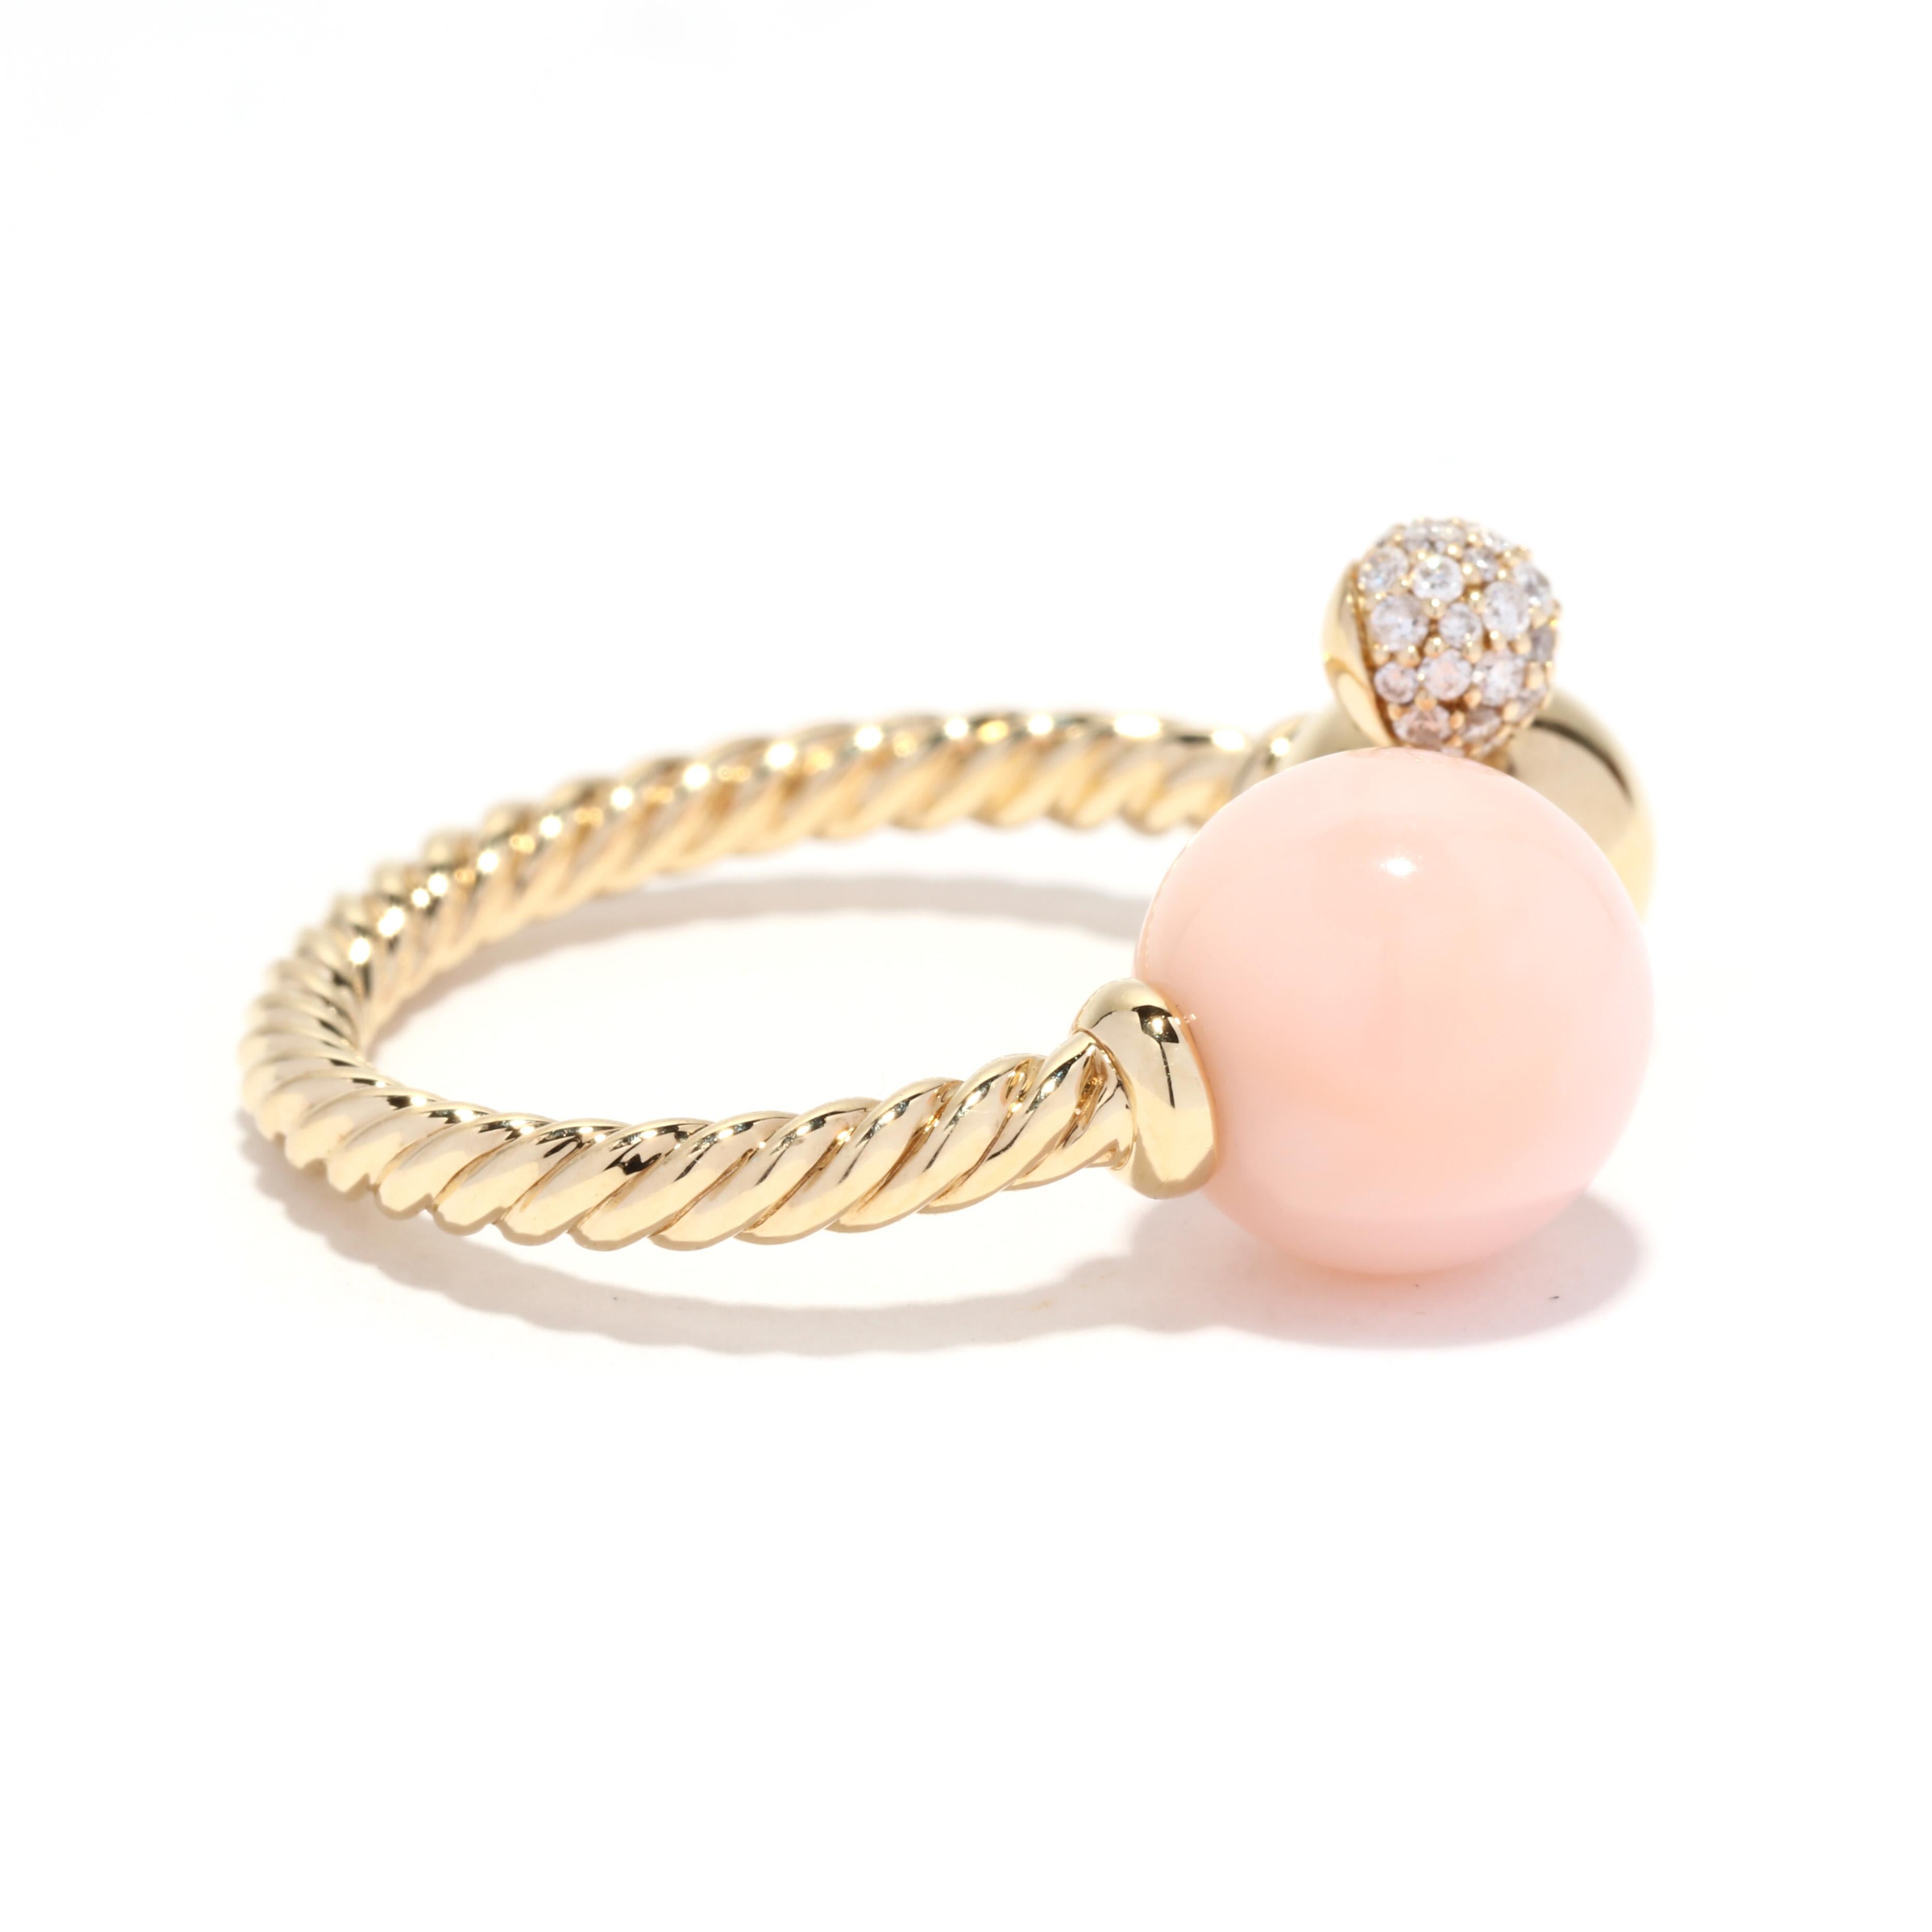 A David Yurman 18 karat yellow gold diamond and pink opal Solari ring. This cocktail ring features a cable motif band in an open design with a round pink opal bead end cap on one end and a gold bead with a pavé diamond ball weighing approximately